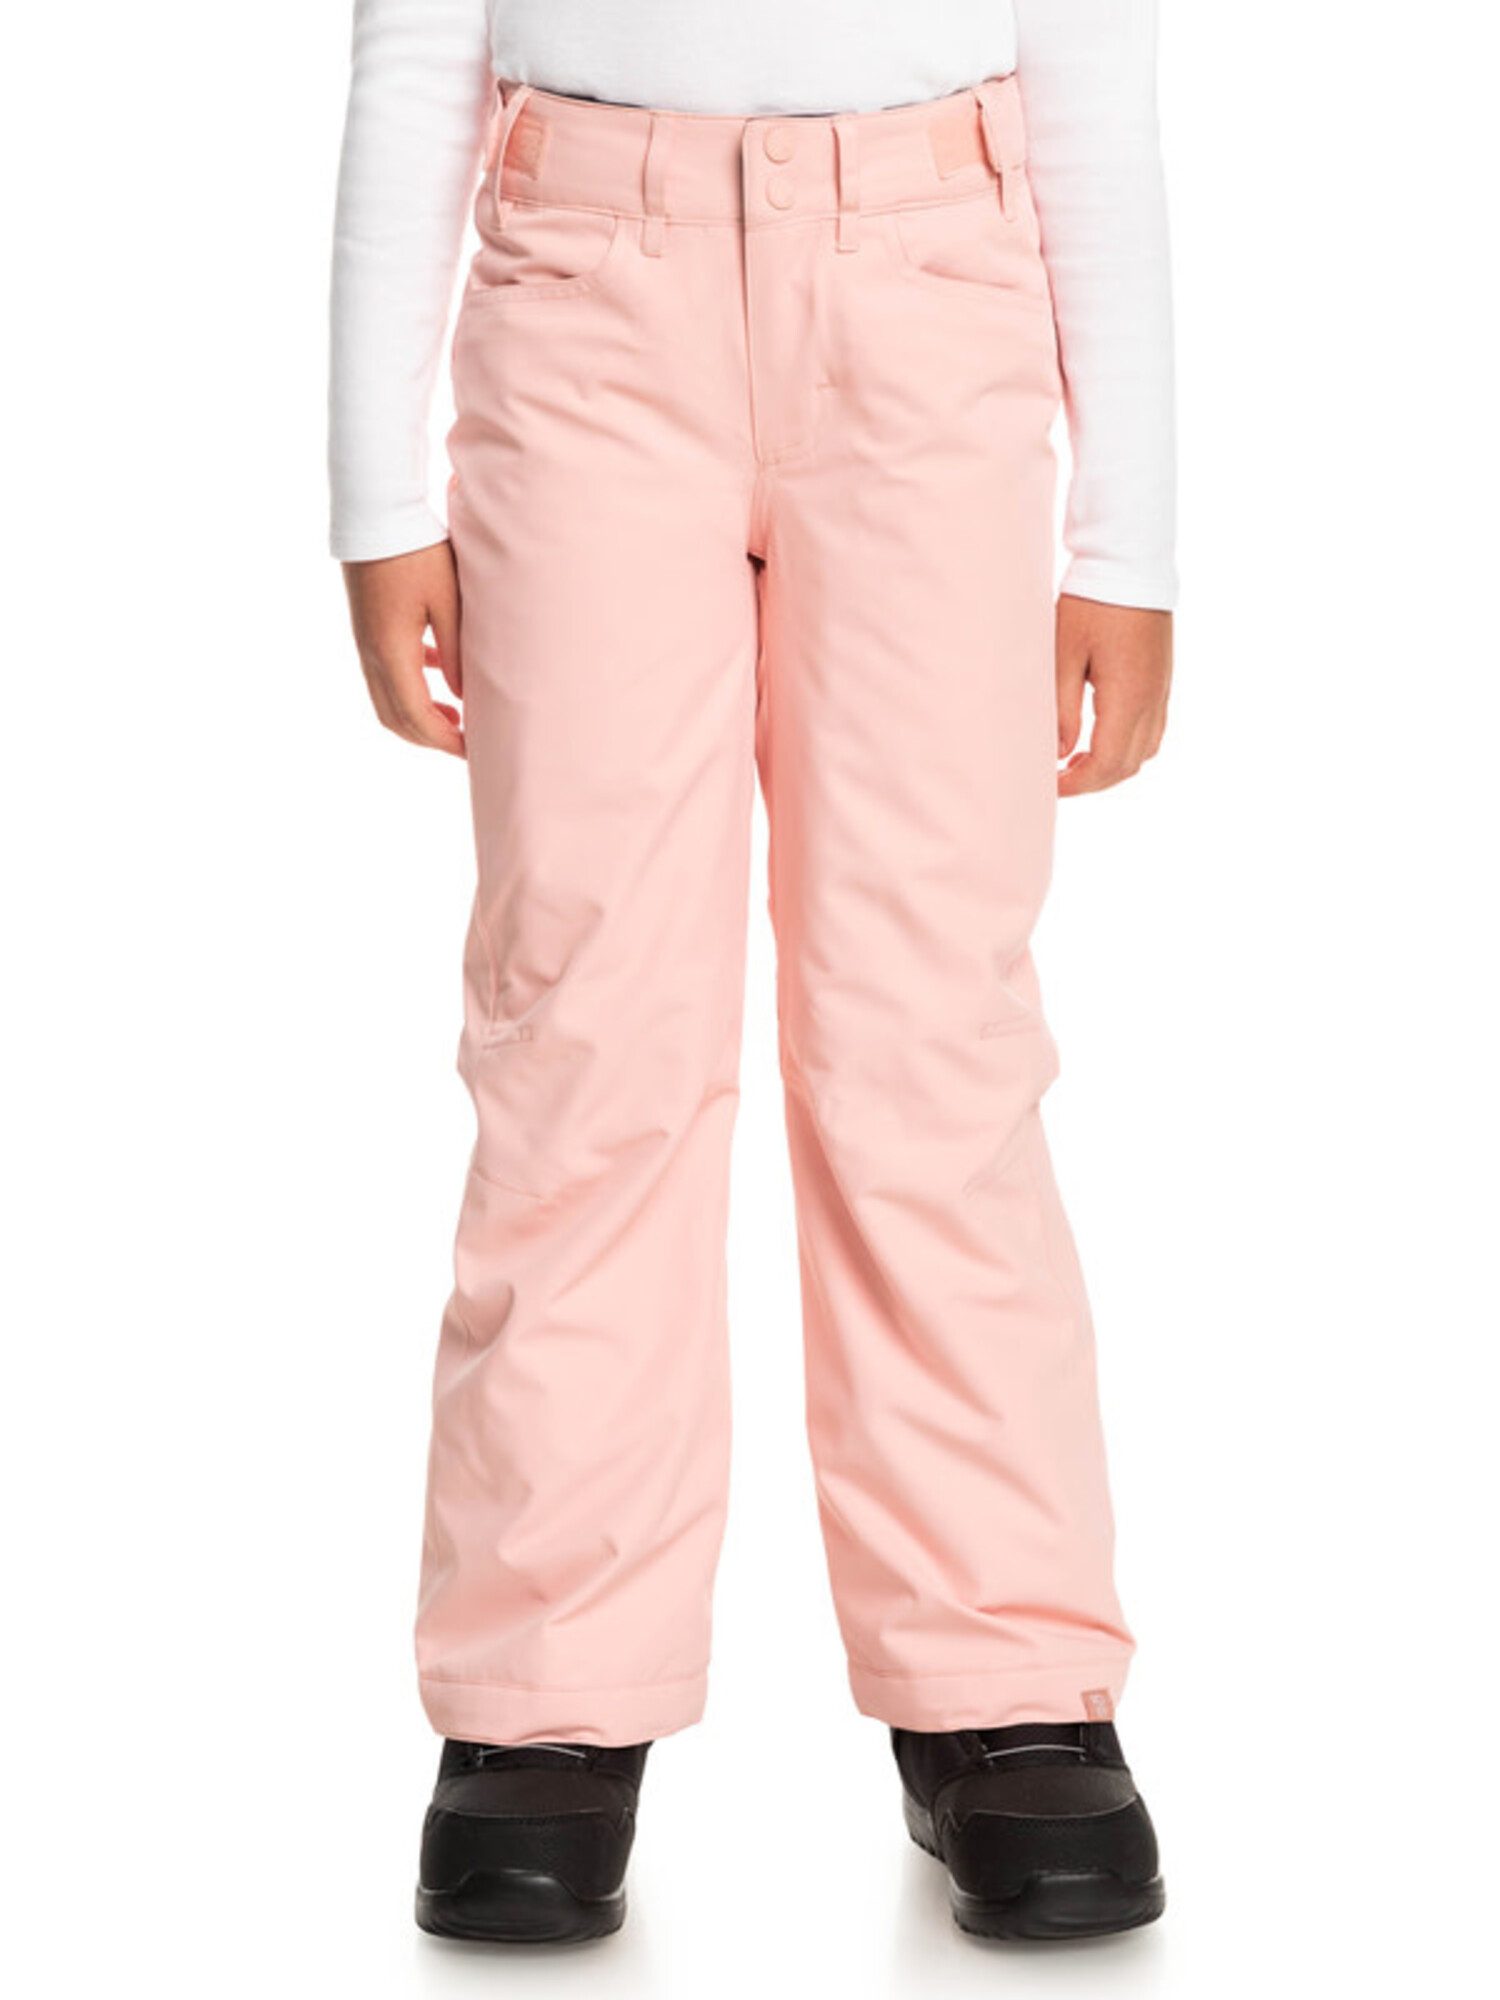 Backyard - Insulated Snow Pants for Girls